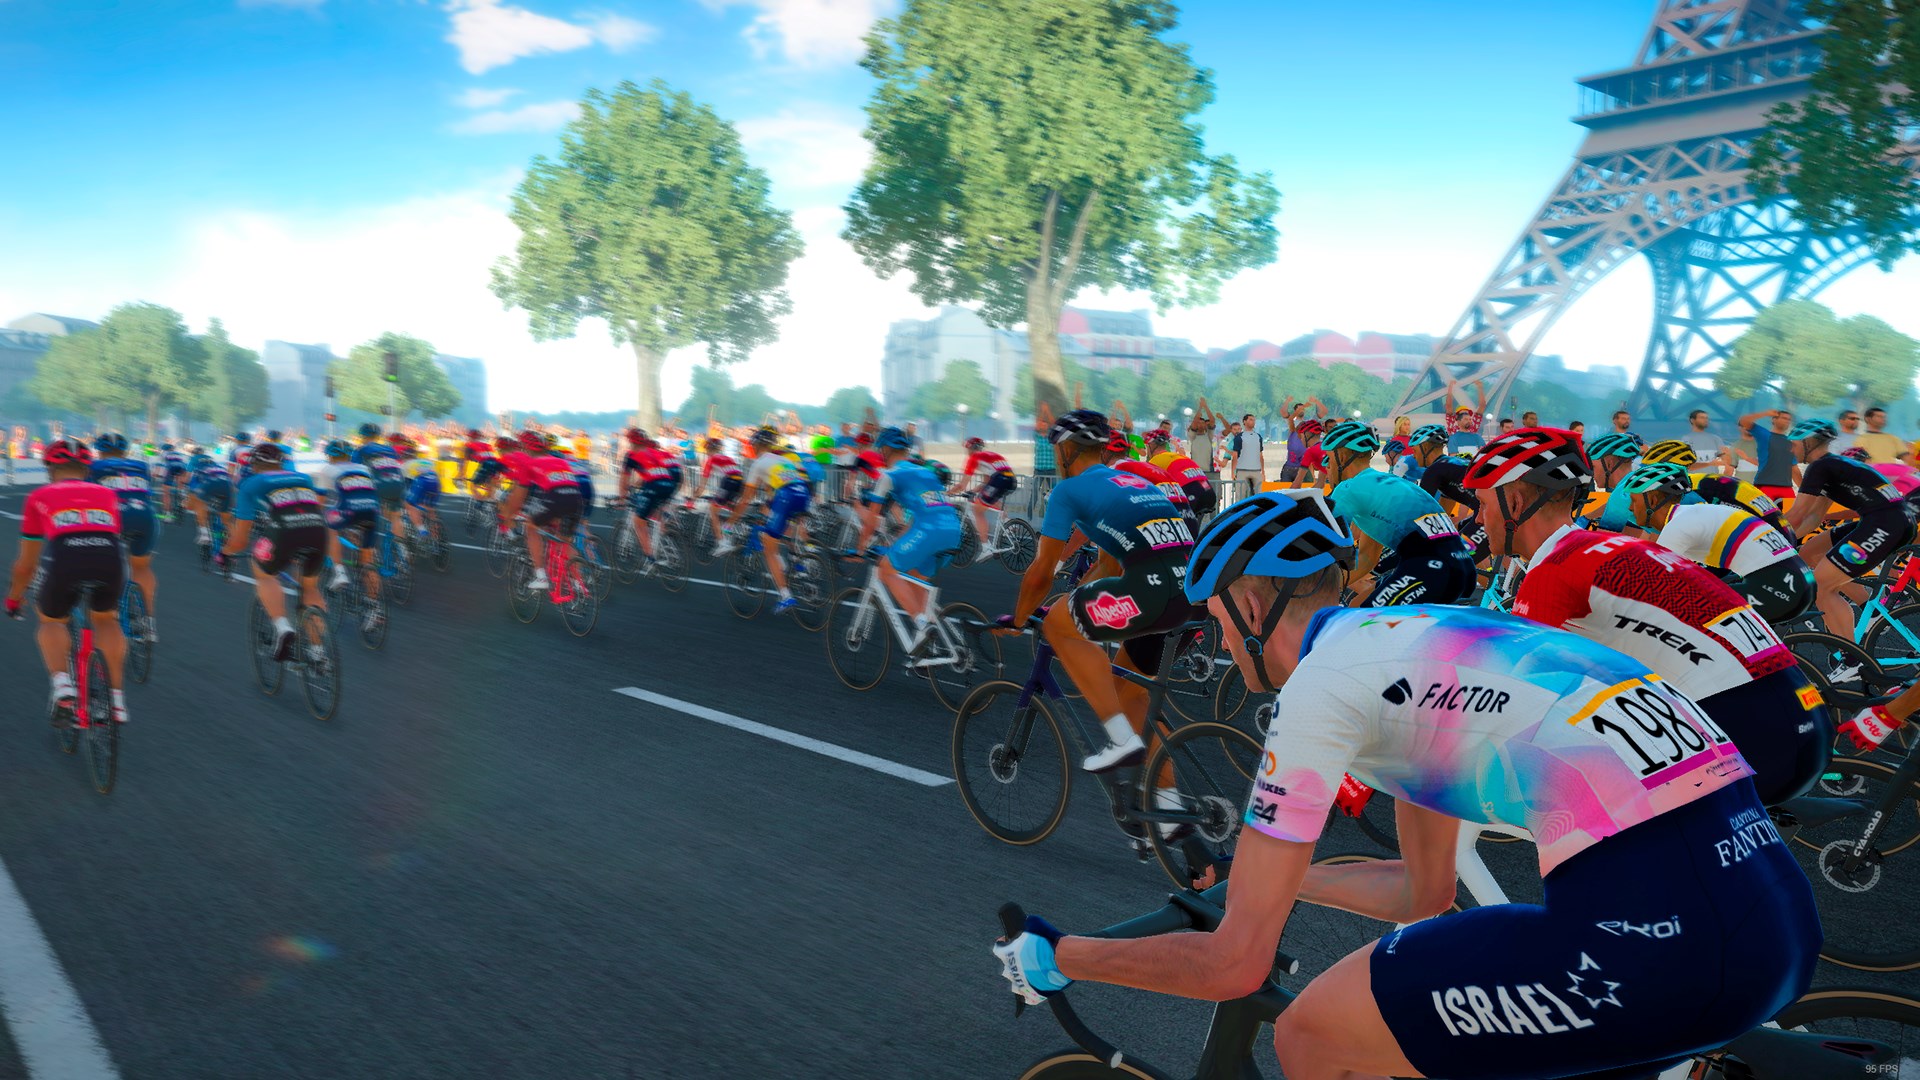 Pro Cycling Manager 2023 STEAM digital